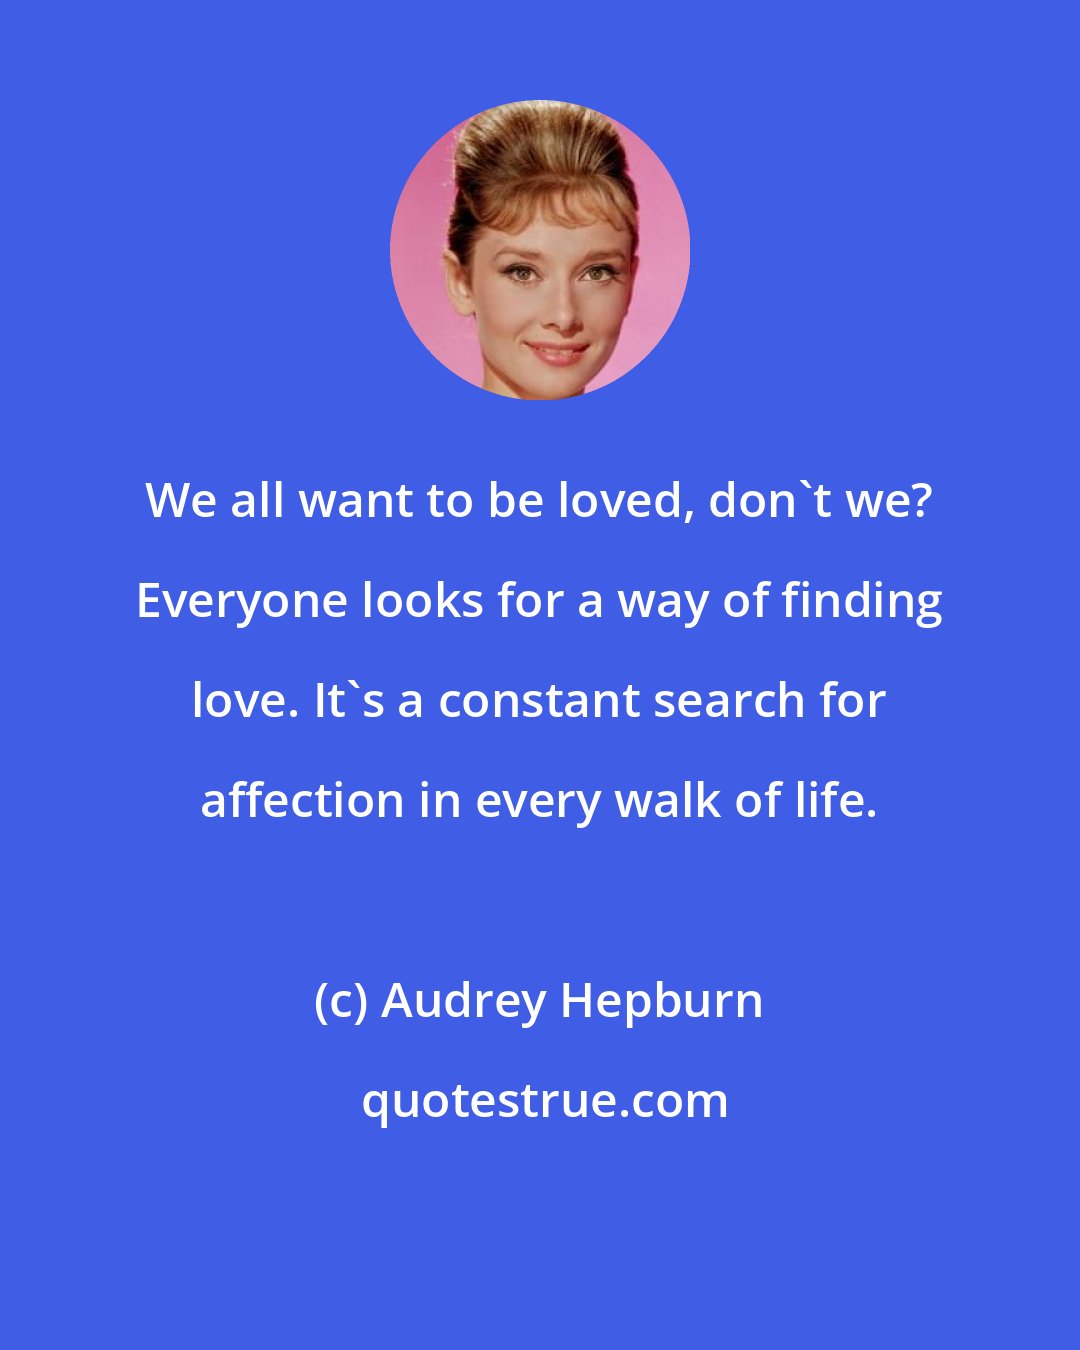 Audrey Hepburn: We all want to be loved, don't we? Everyone looks for a way of finding love. It's a constant search for affection in every walk of life.